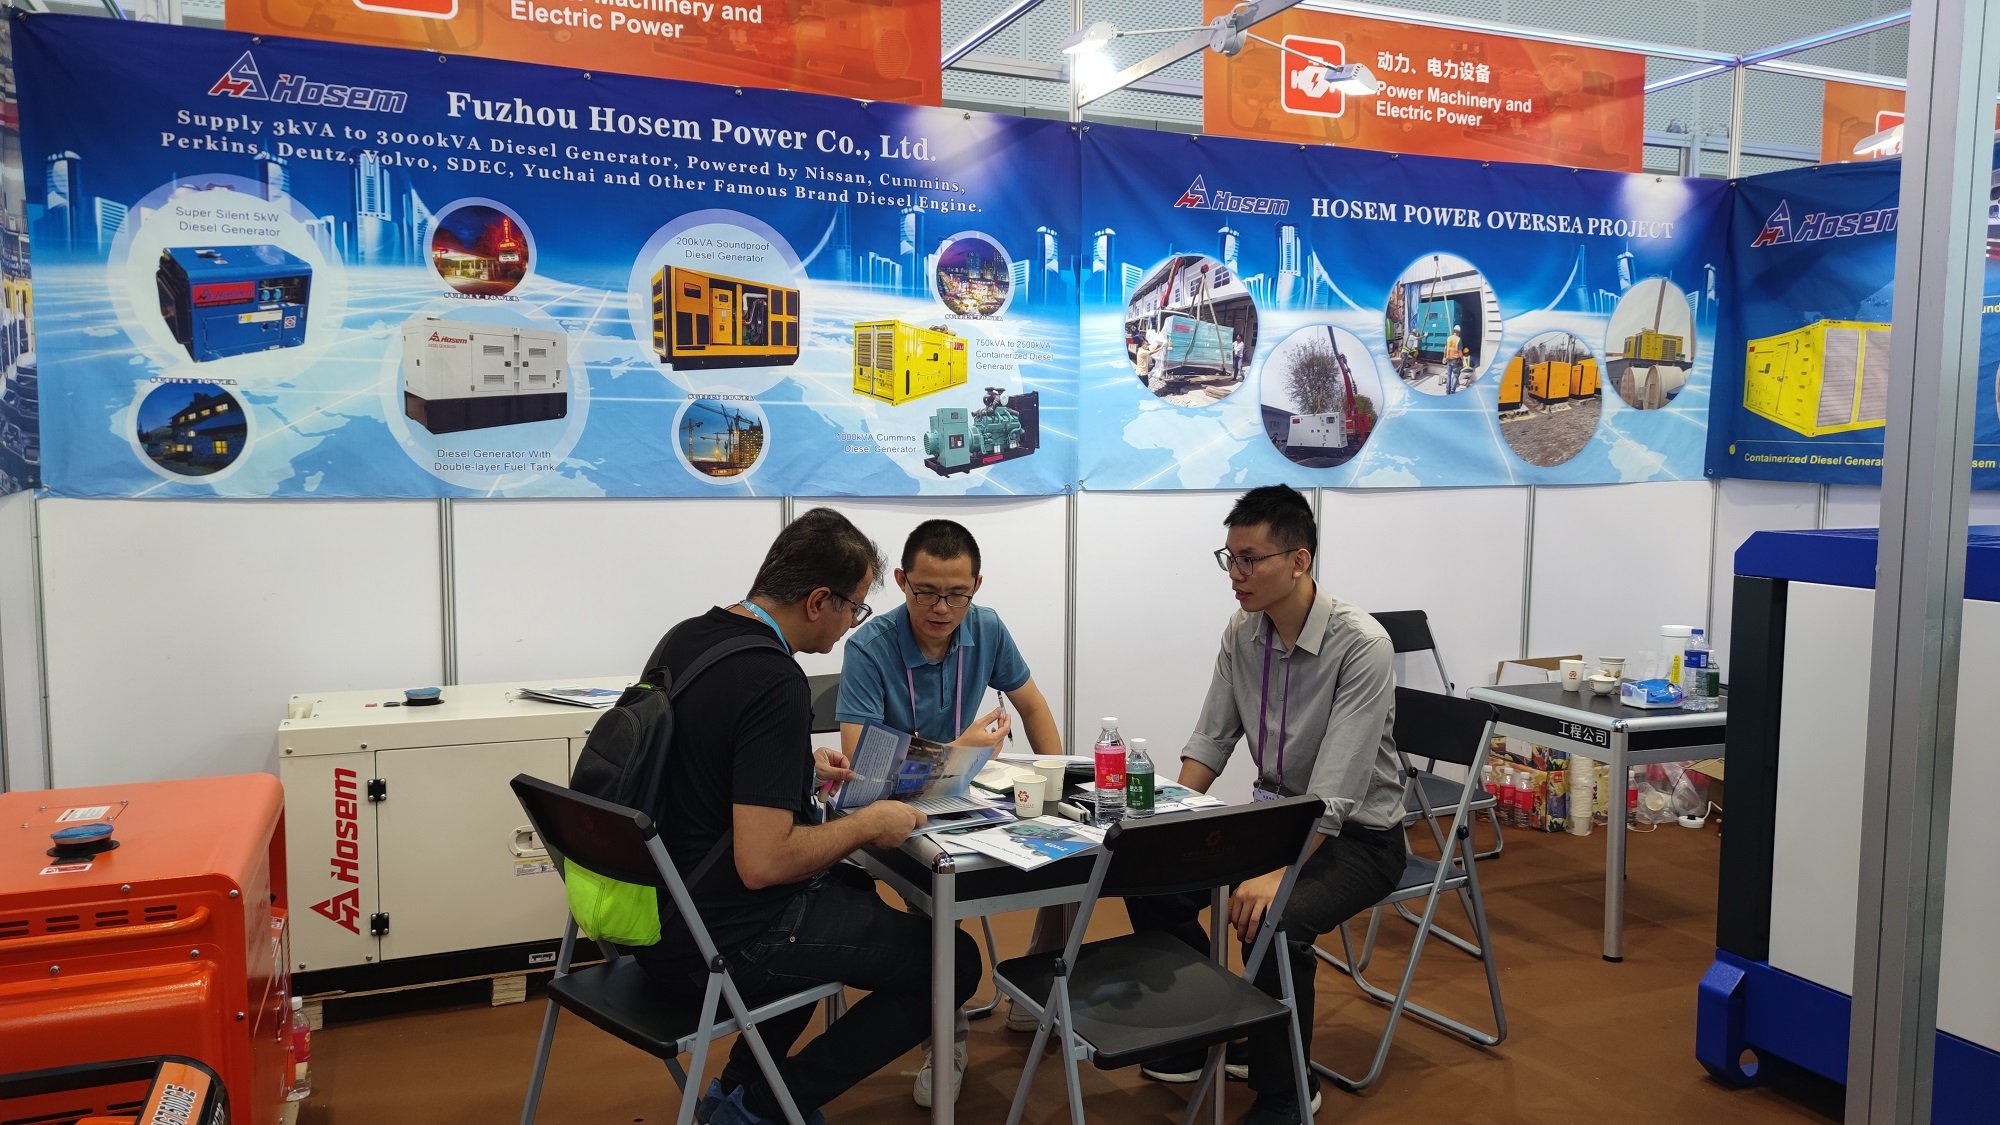 Hosem Power Successfully Completed the 134th Canton Fair for Diesel Generator Business